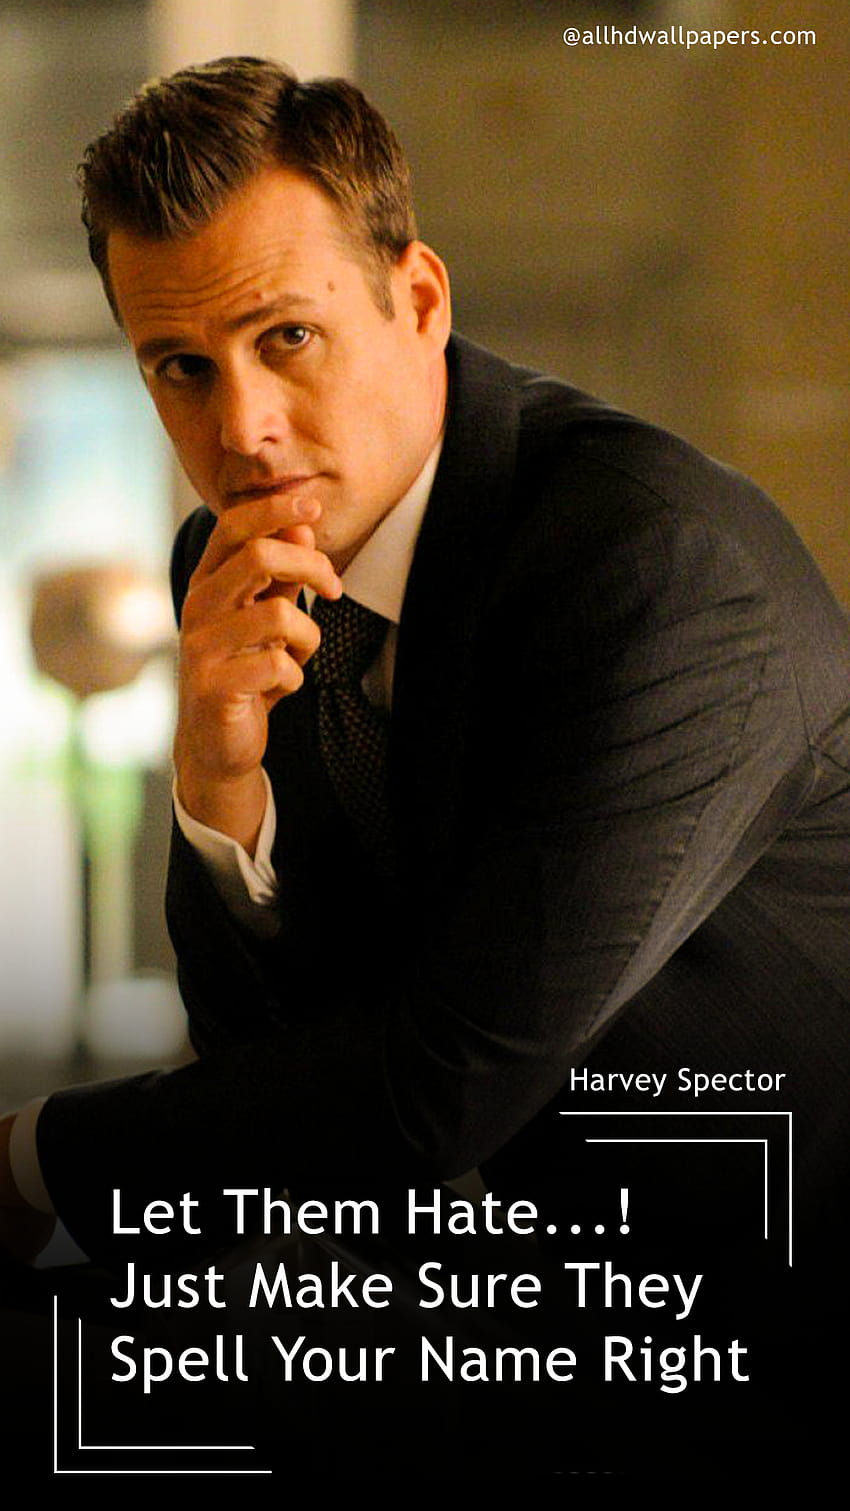 Get your dose of workwear inspo from Harvey Specter in Suits